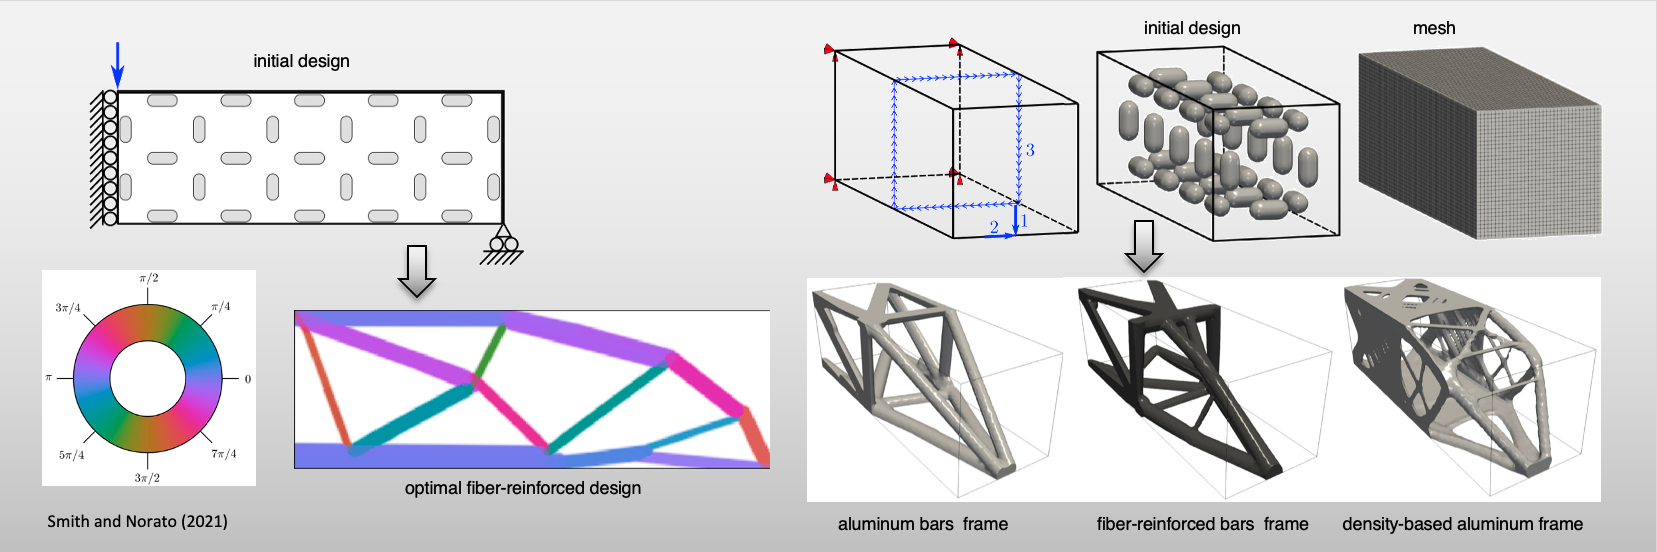 This slide shows examples of topology optimization of frame structures with fiber-reinforced bars